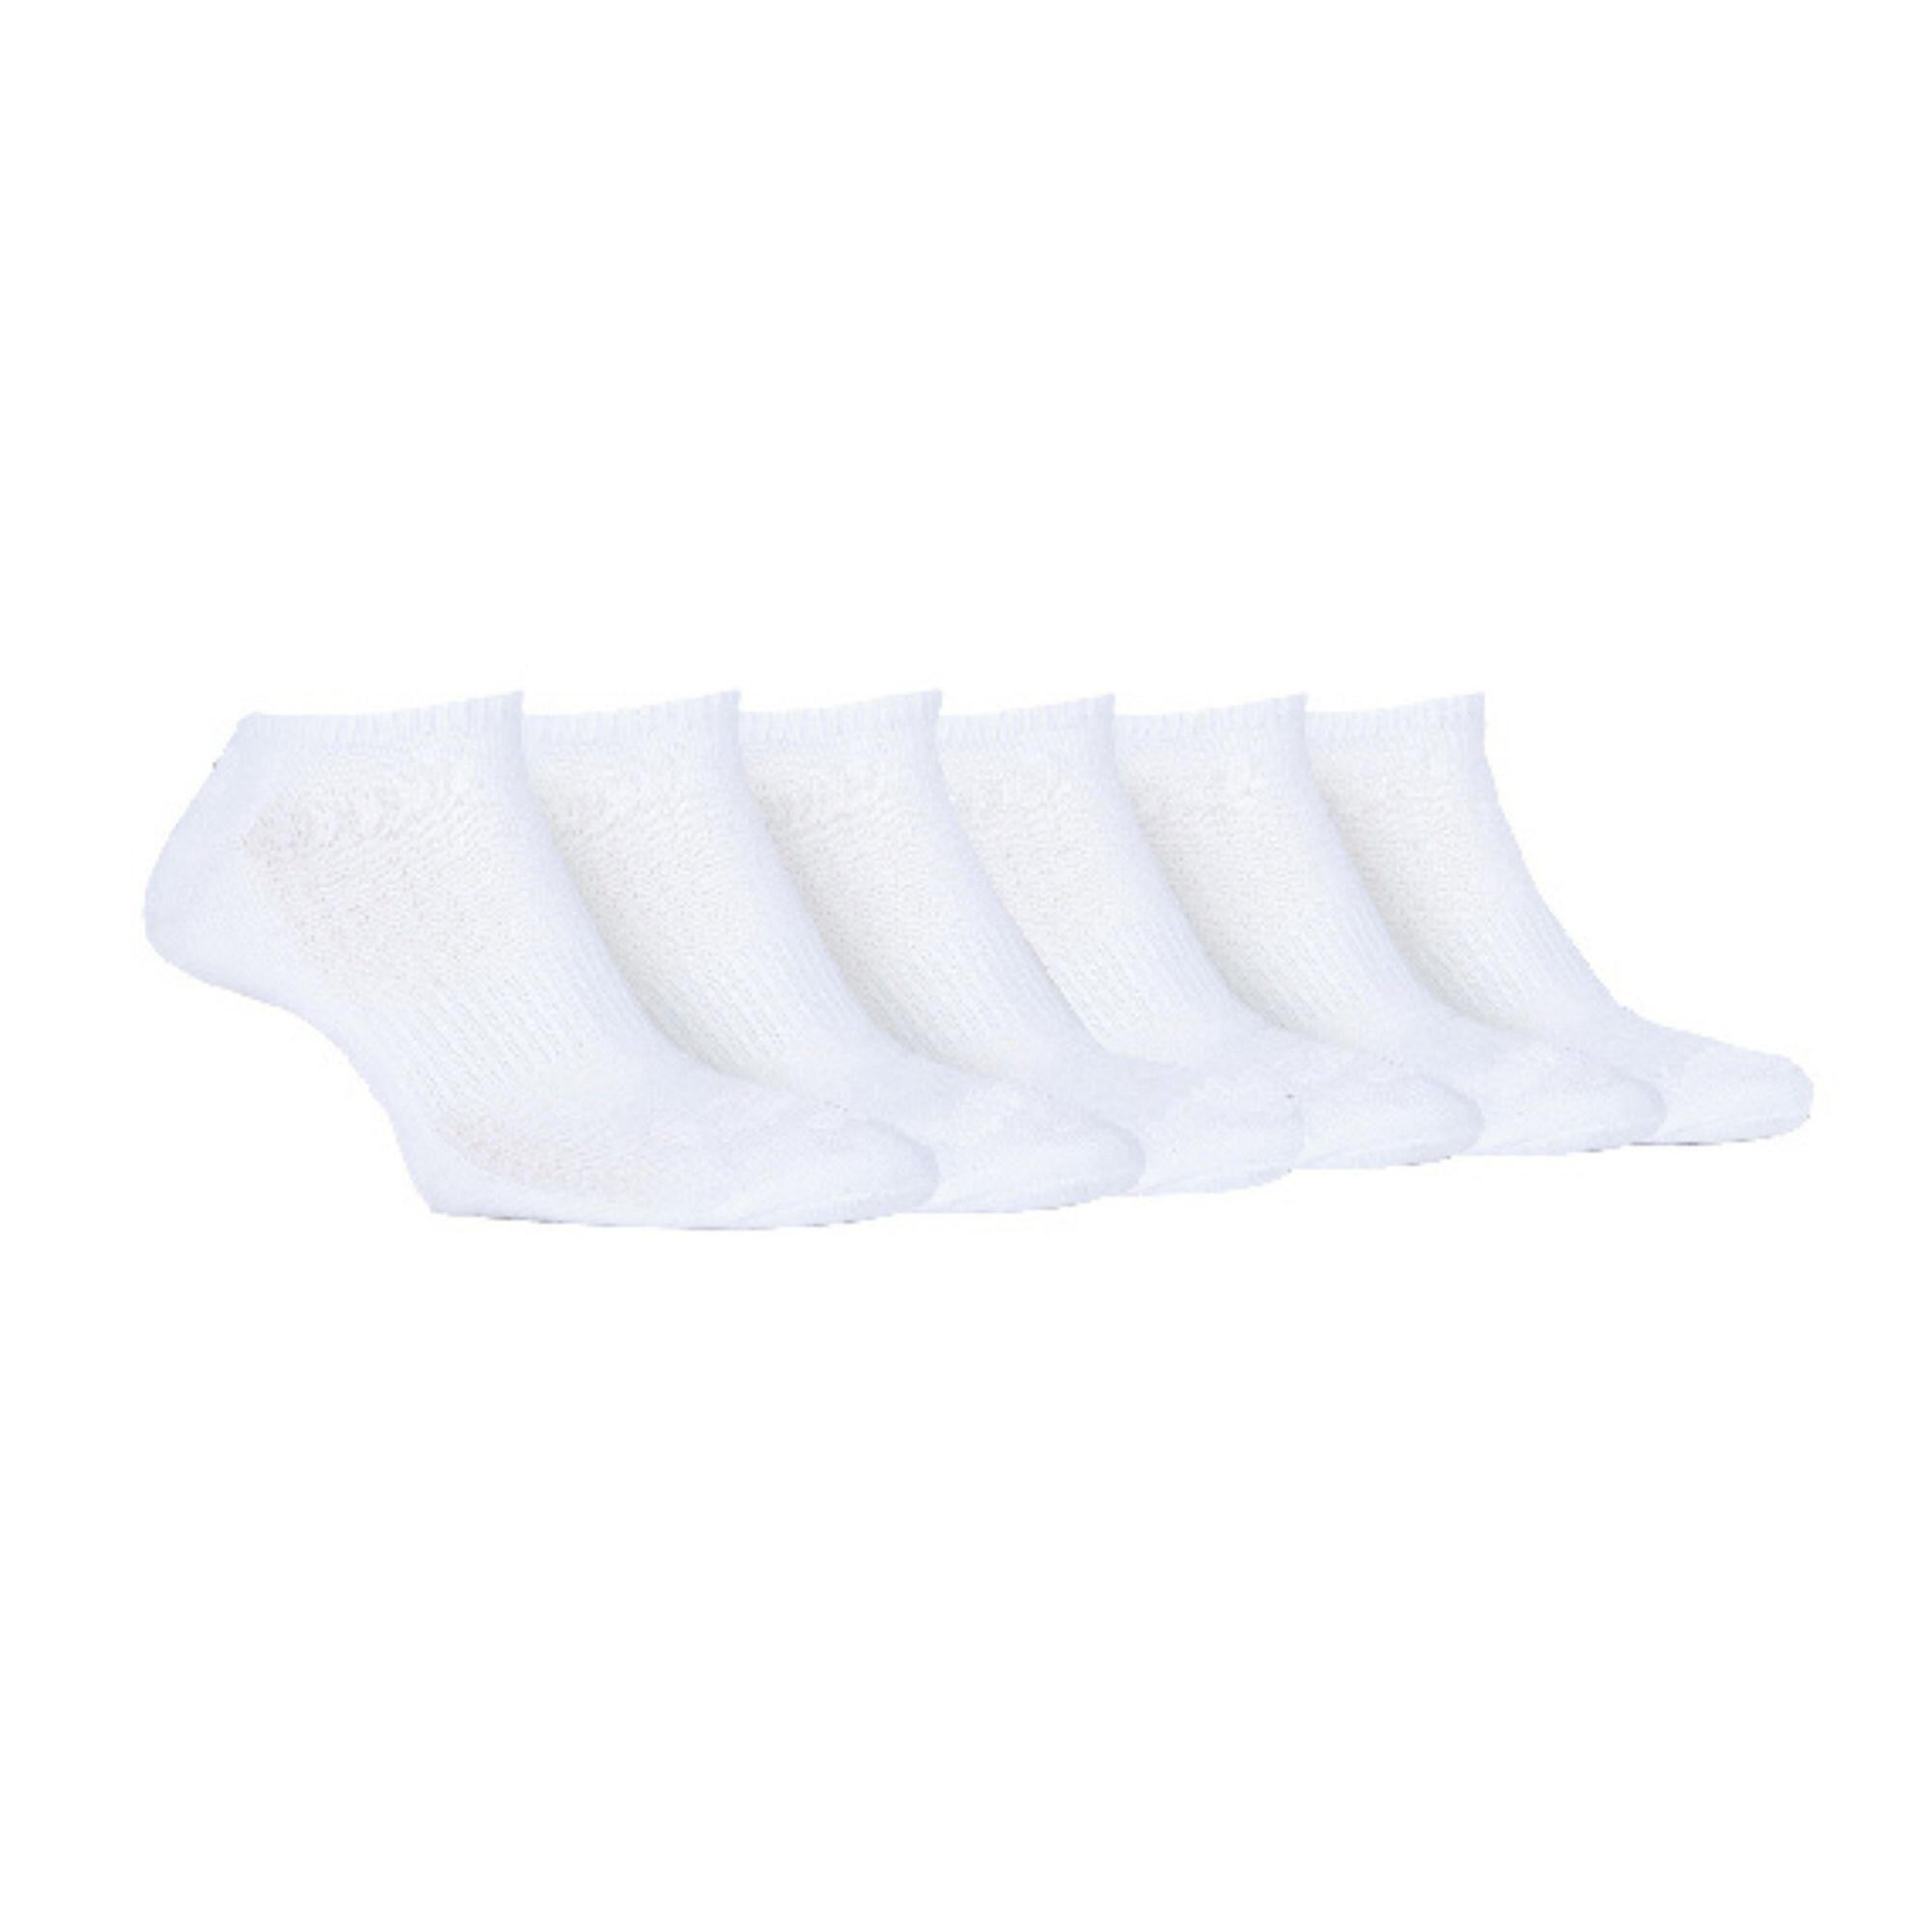 6 Pairs Ladies Cotton Cushioned Low Cut Sport Ankle Socks For Running 1/3